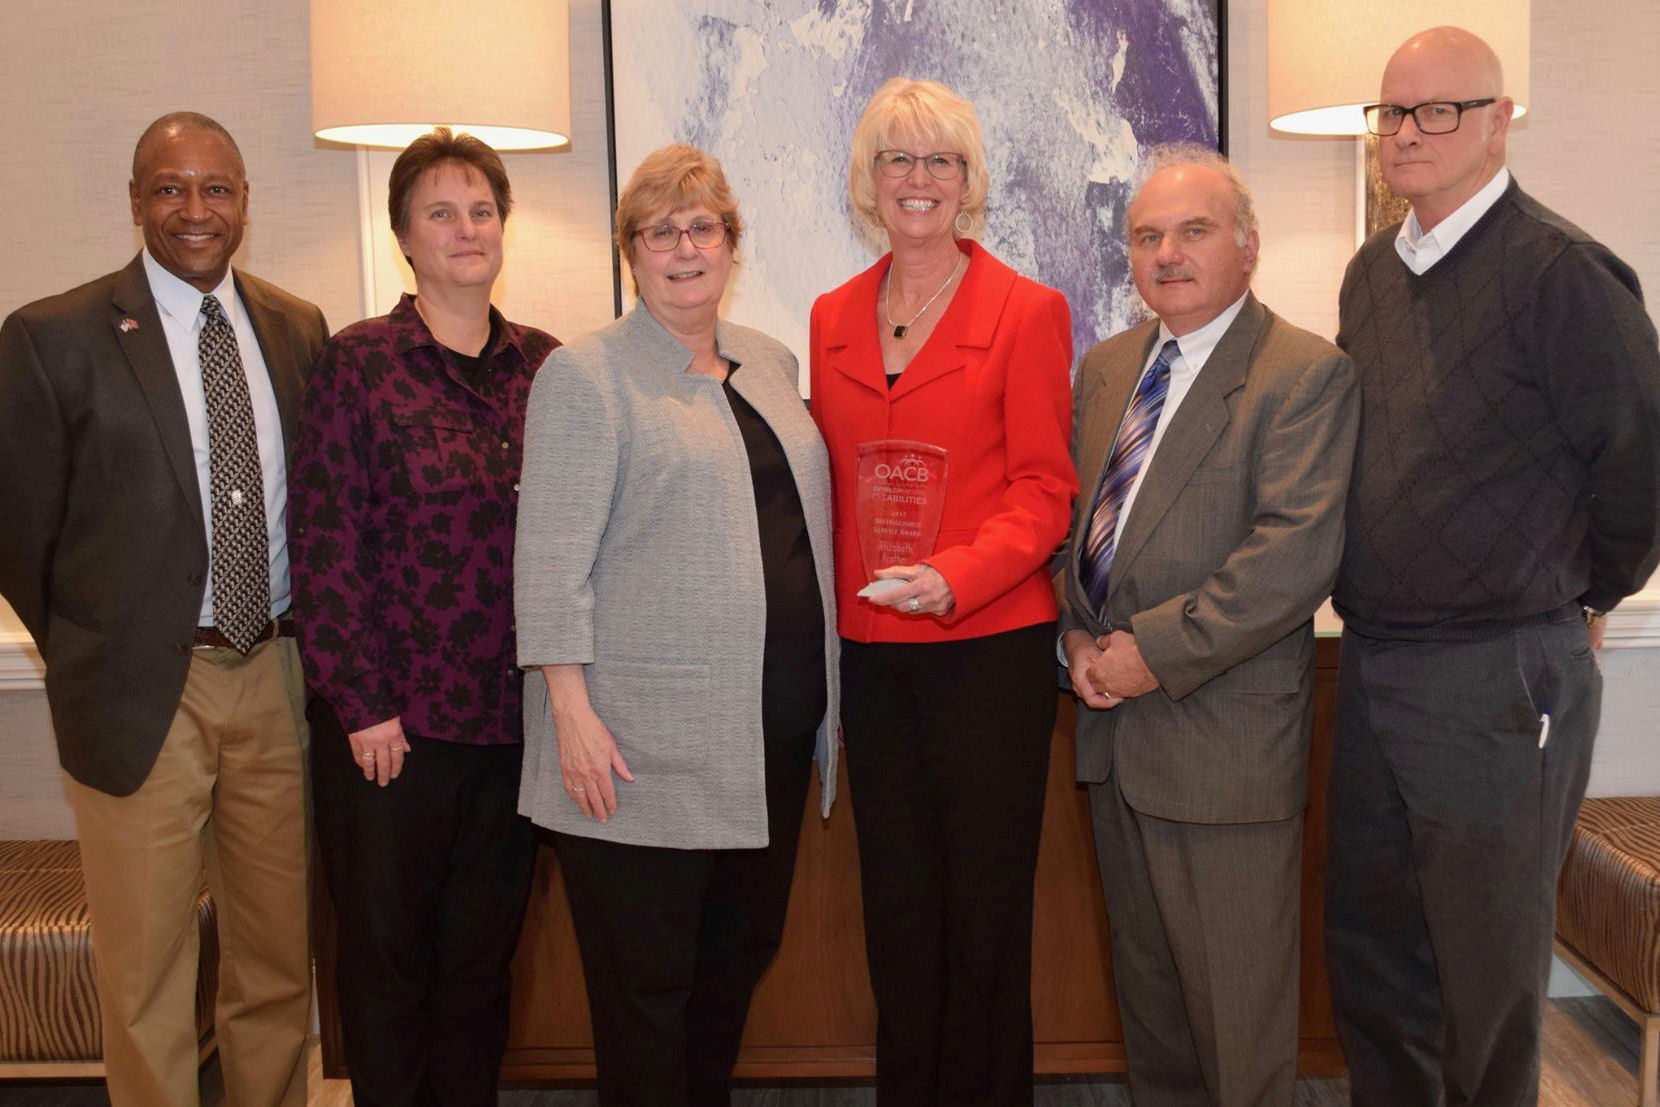 Prather honored with Distinguished Service Award from OACB